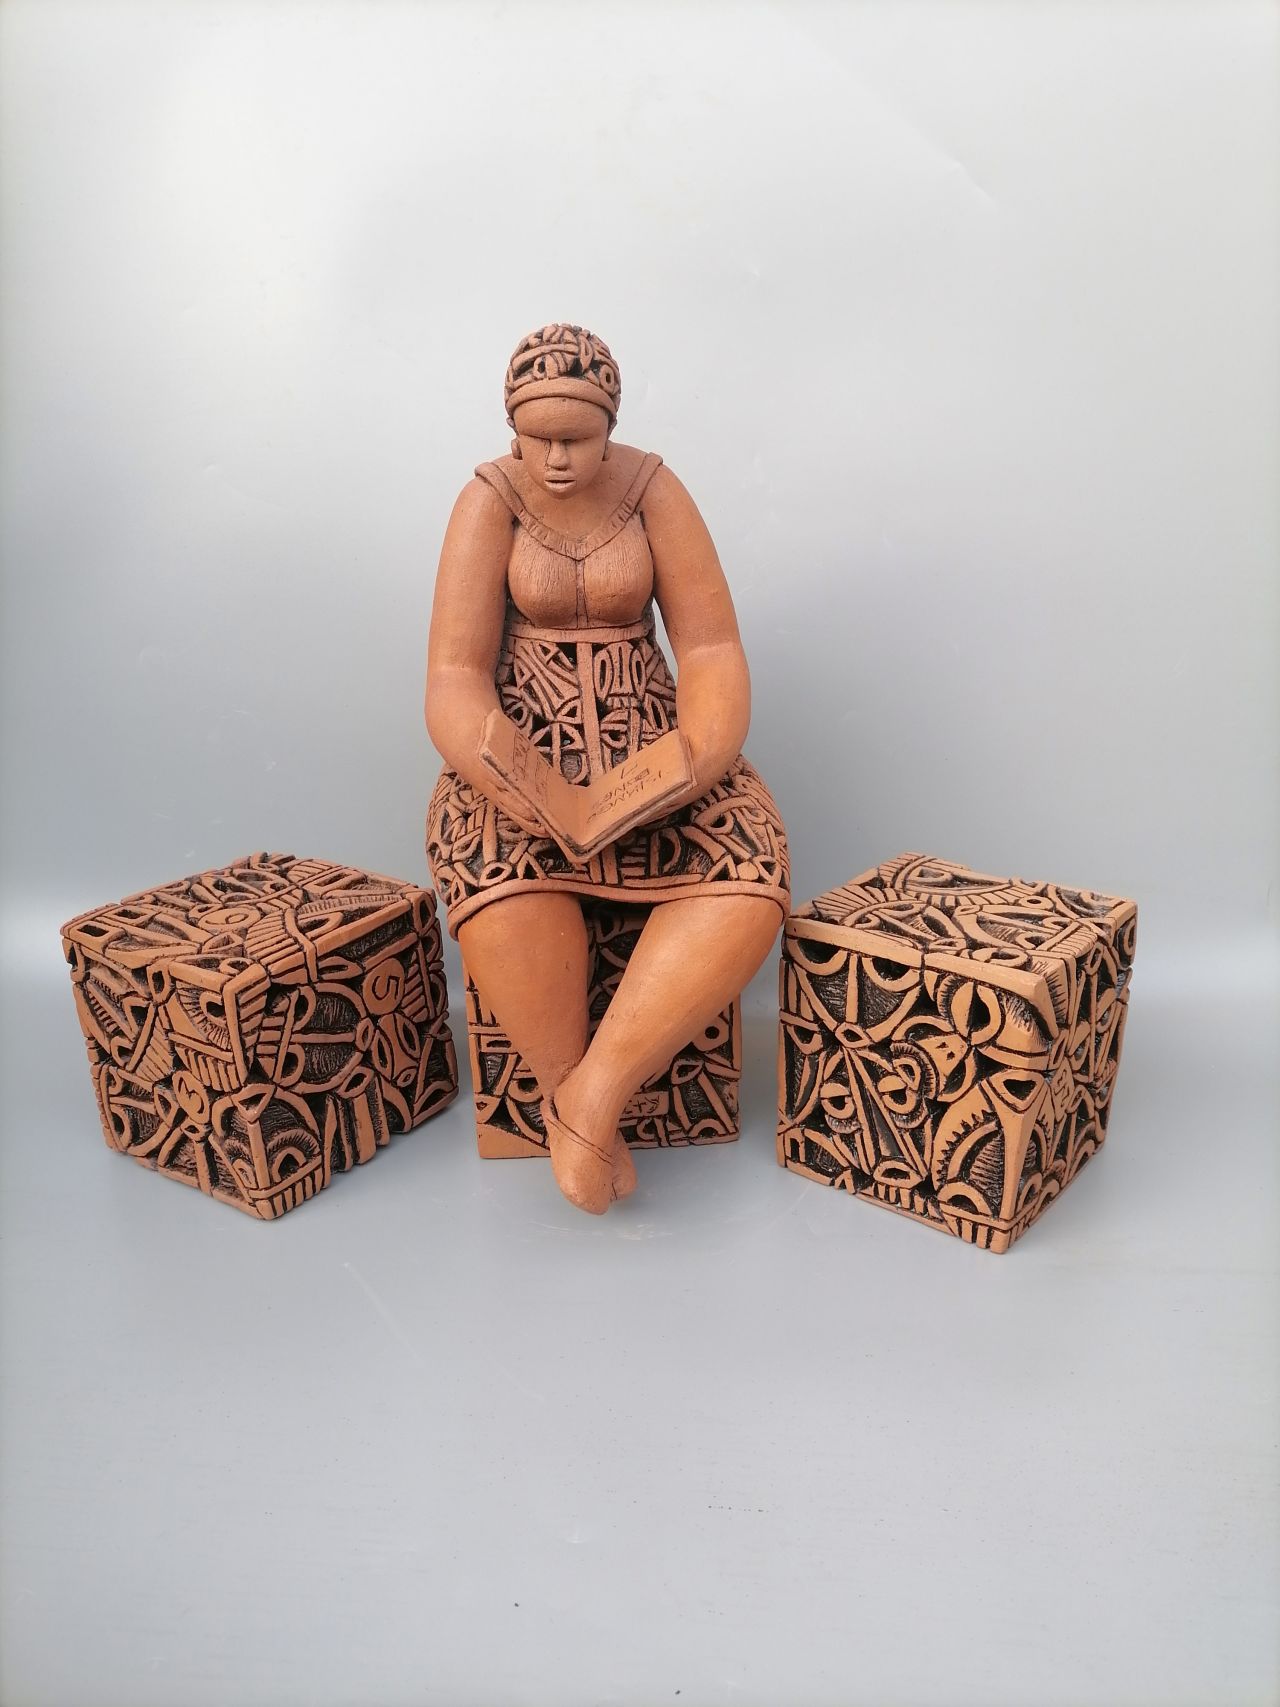 "The Mathematician" (2021) by Djakou Kassi Nathalie, a ceramicist from Cameroon.